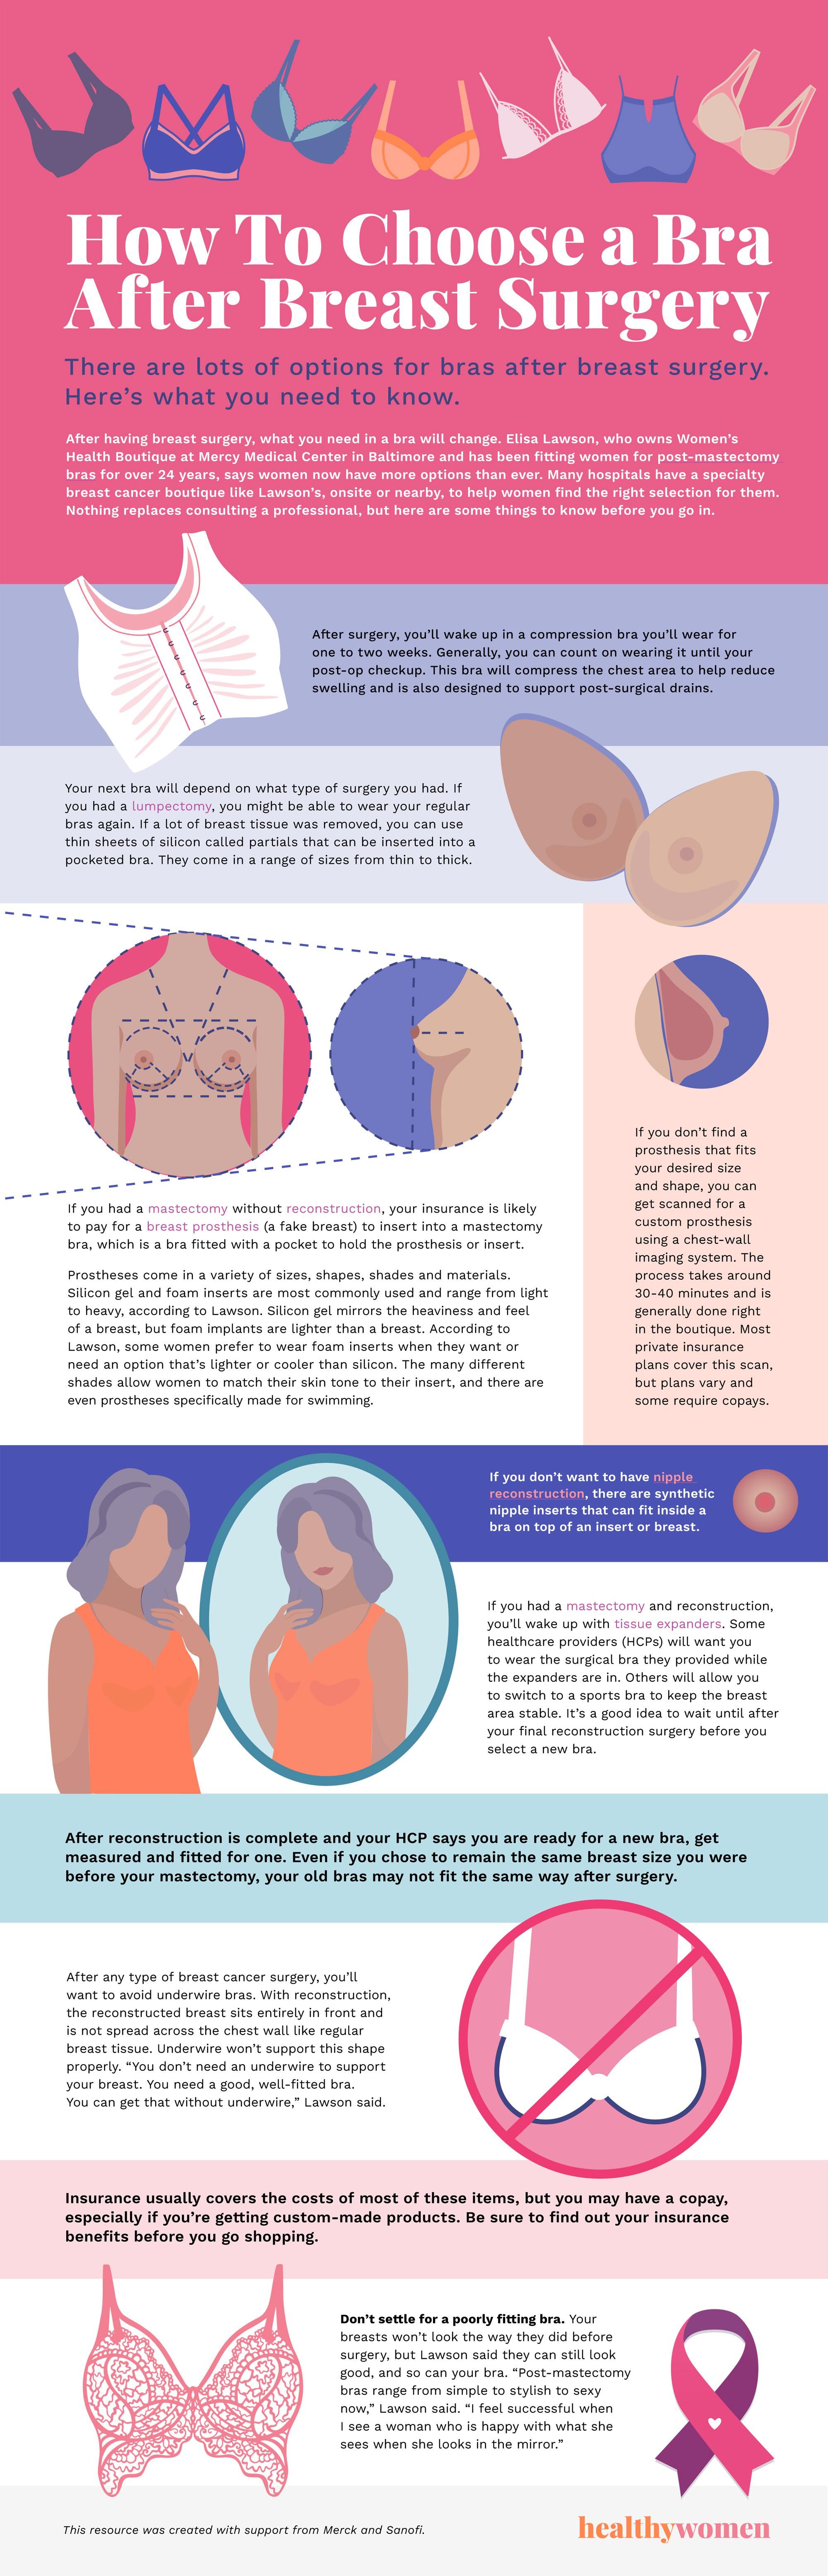 Infographic How To Choose a Bra After Breast Surgery. Click the image to open the PDF